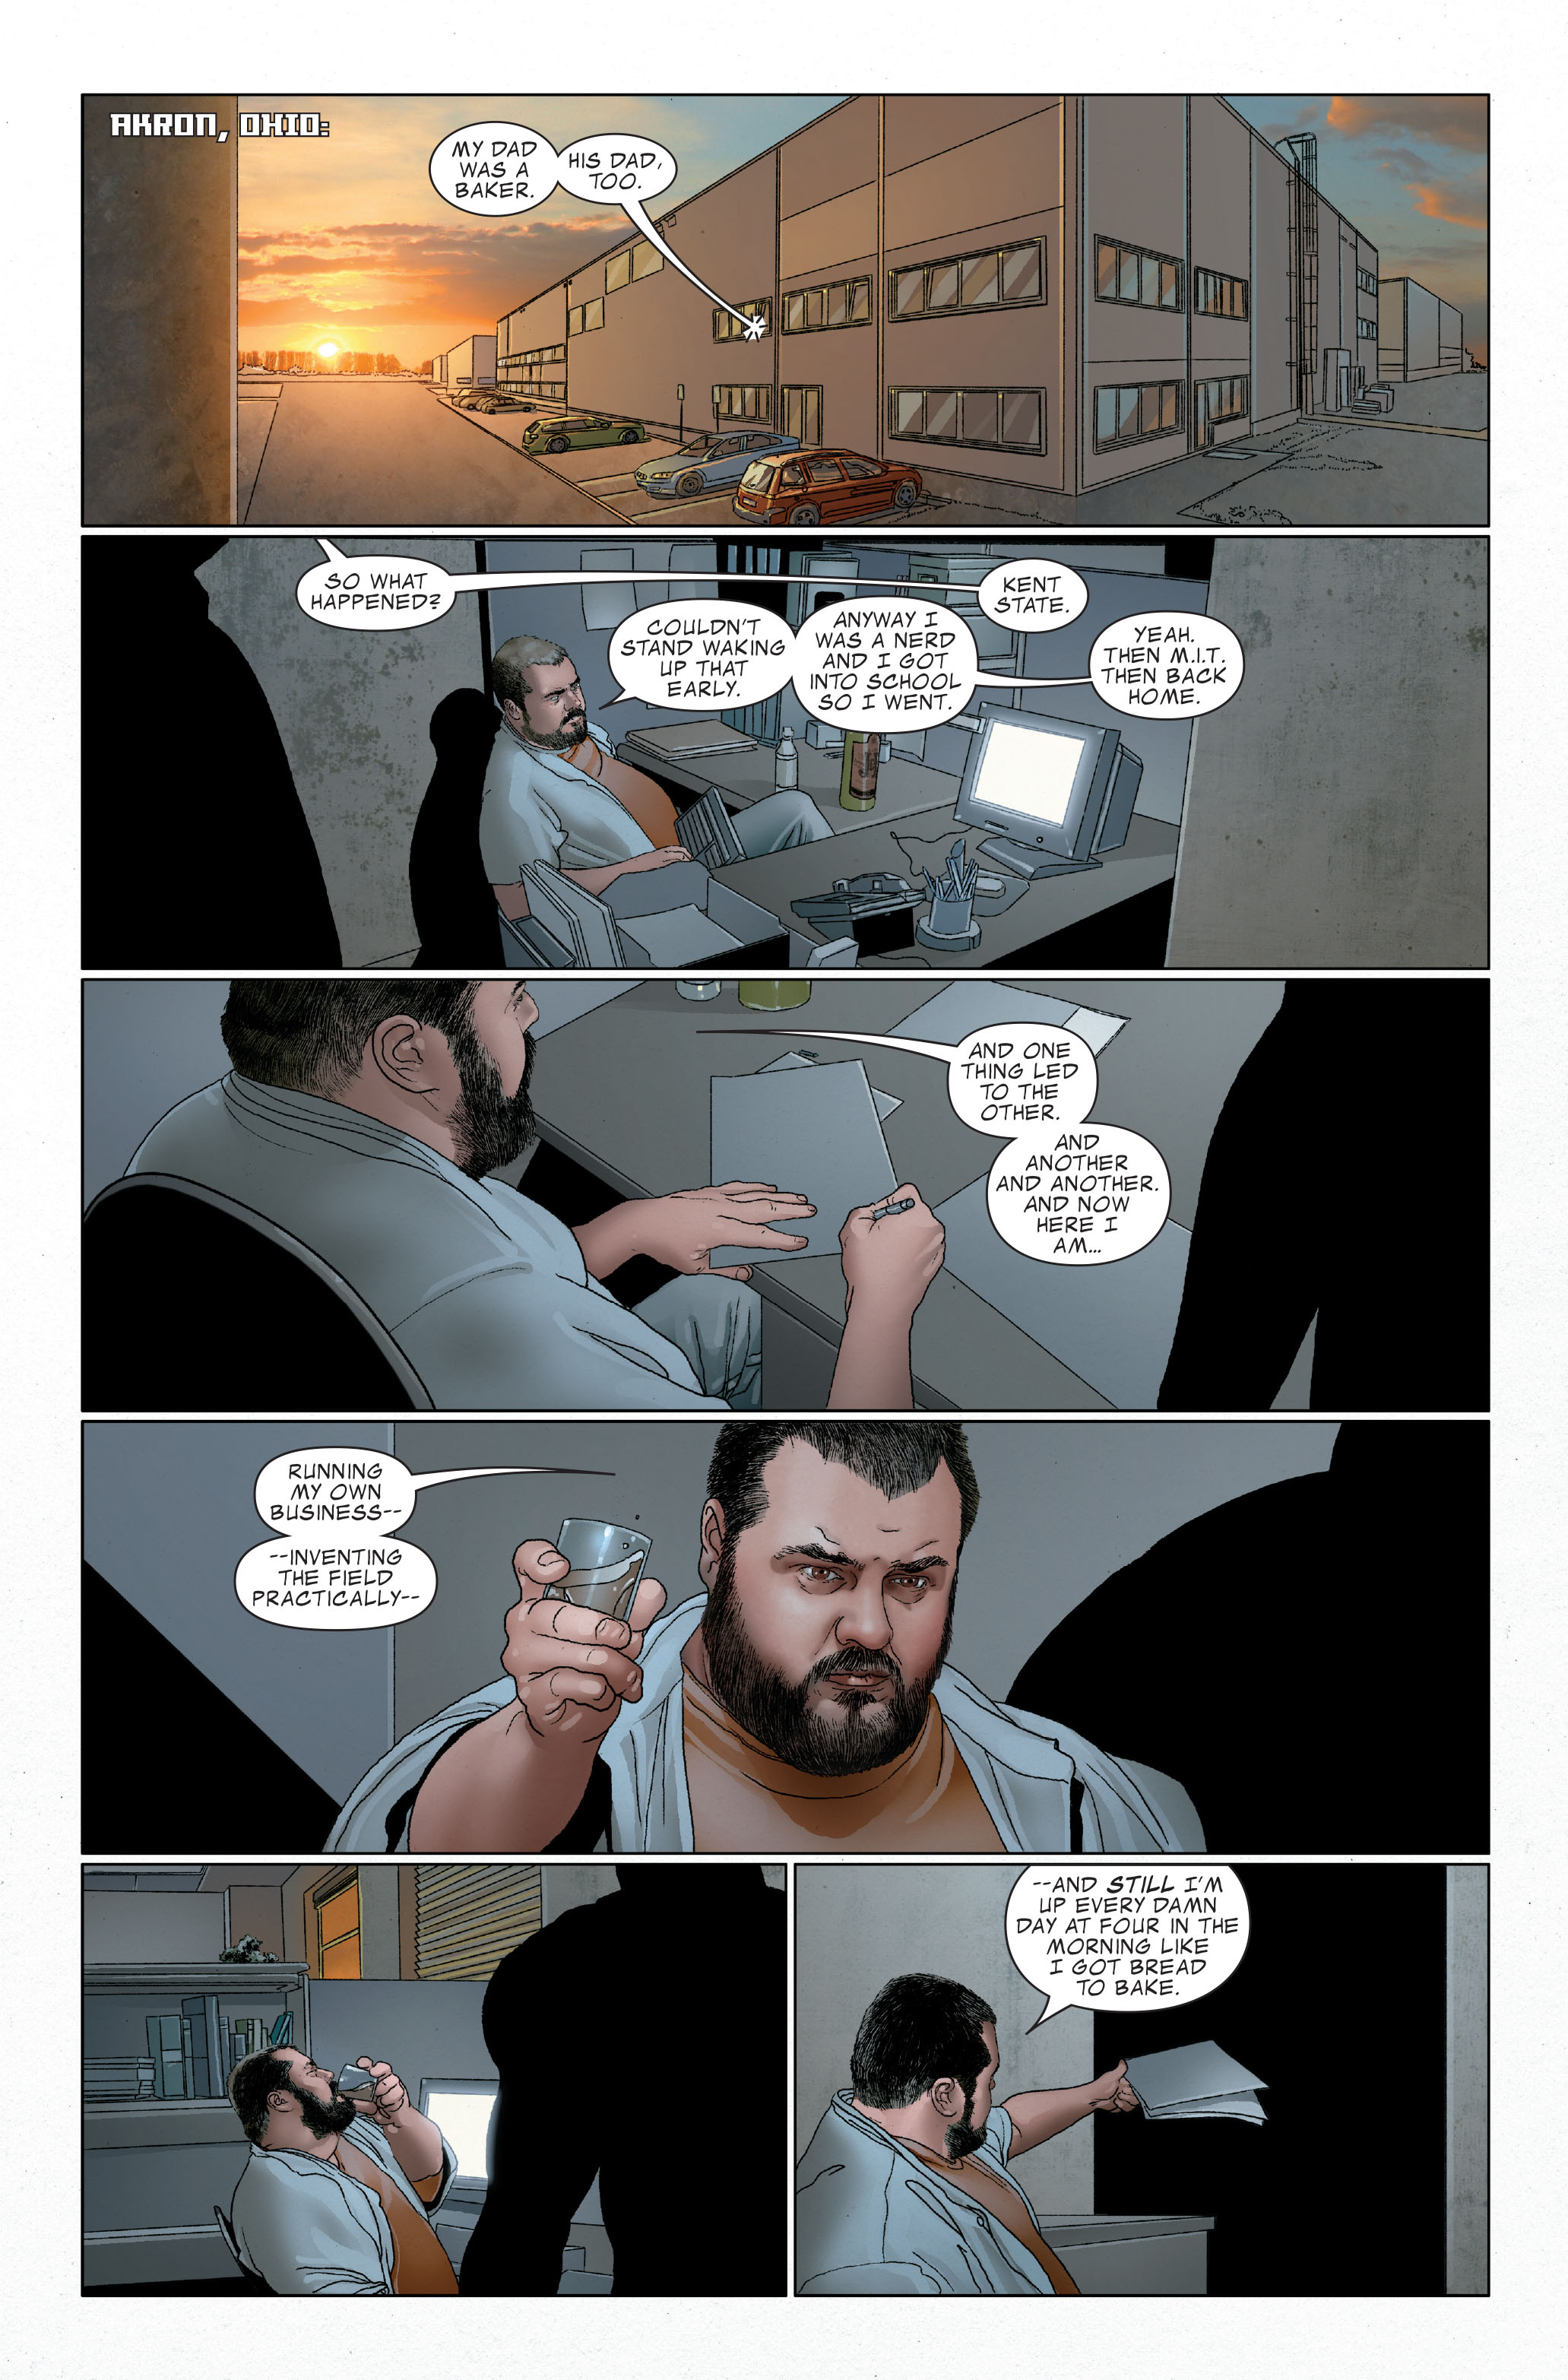 Invincible Iron Man (2008) 26 Page 2